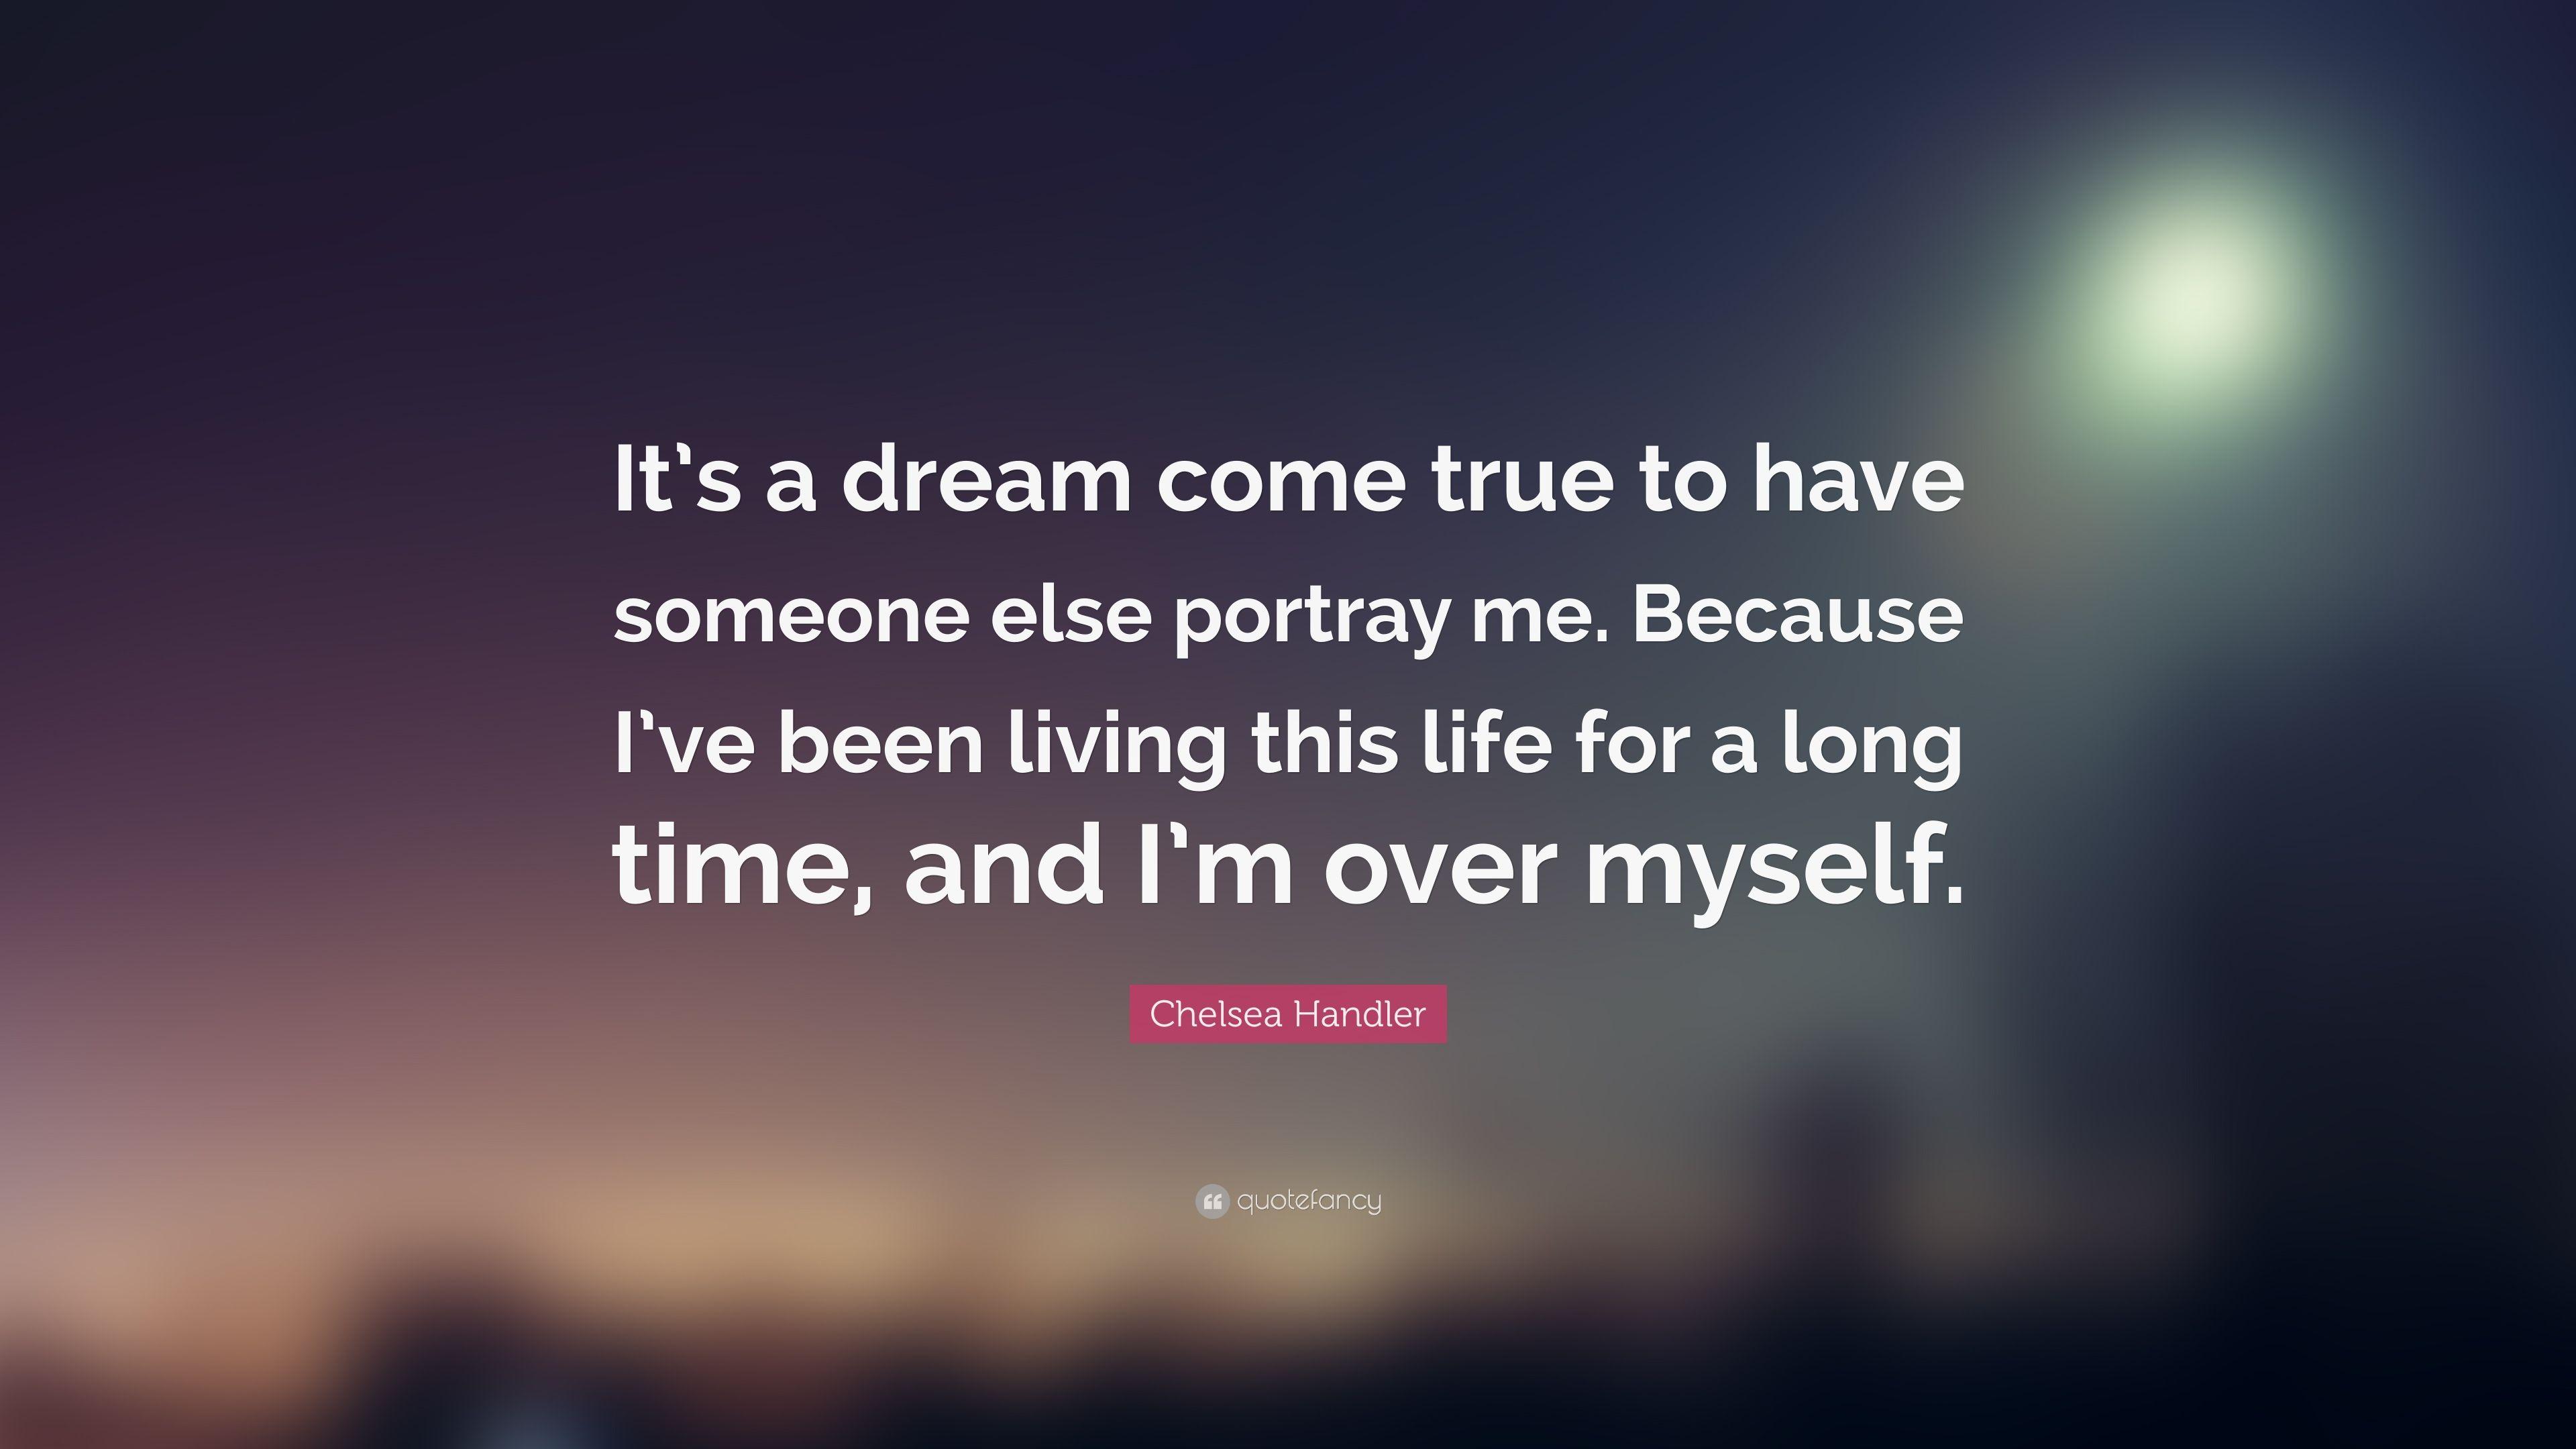 Chelsea Handler Quote: “It's a dream come true to have someone